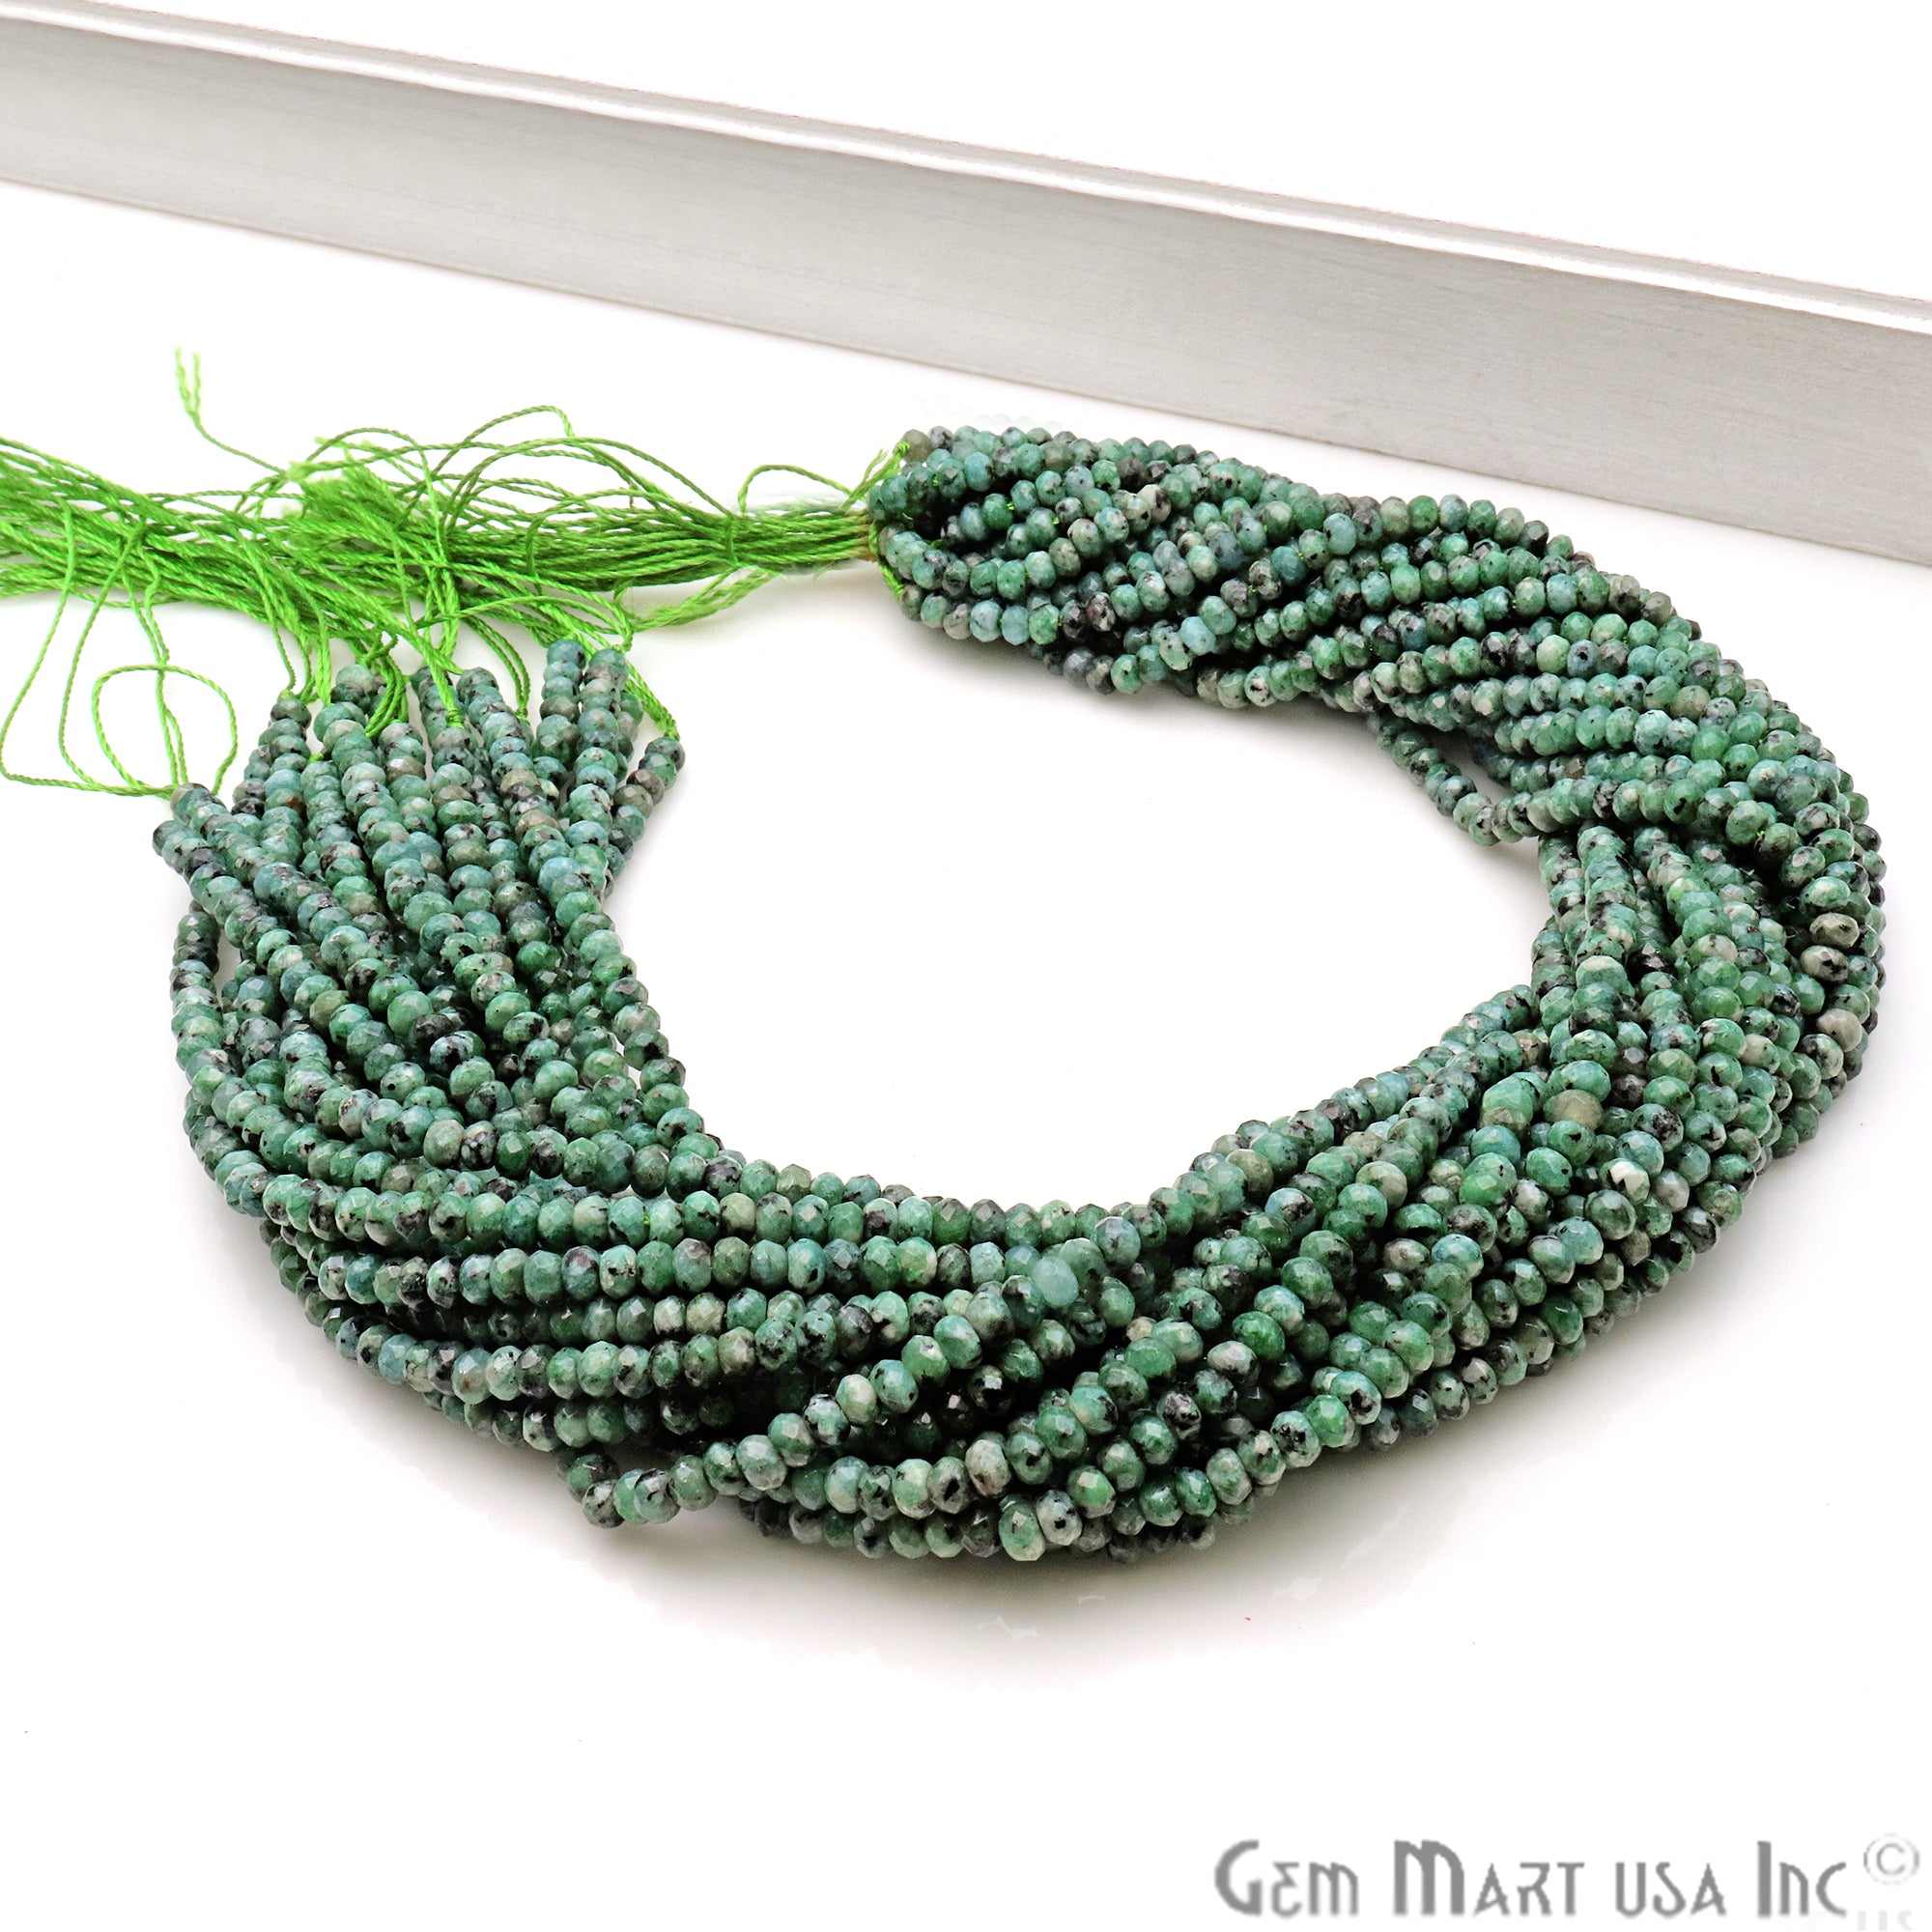 Tibetian Turquoise Jade 3-4mm Faceted Rondelle Beads Strands 14Inch - GemMartUSA